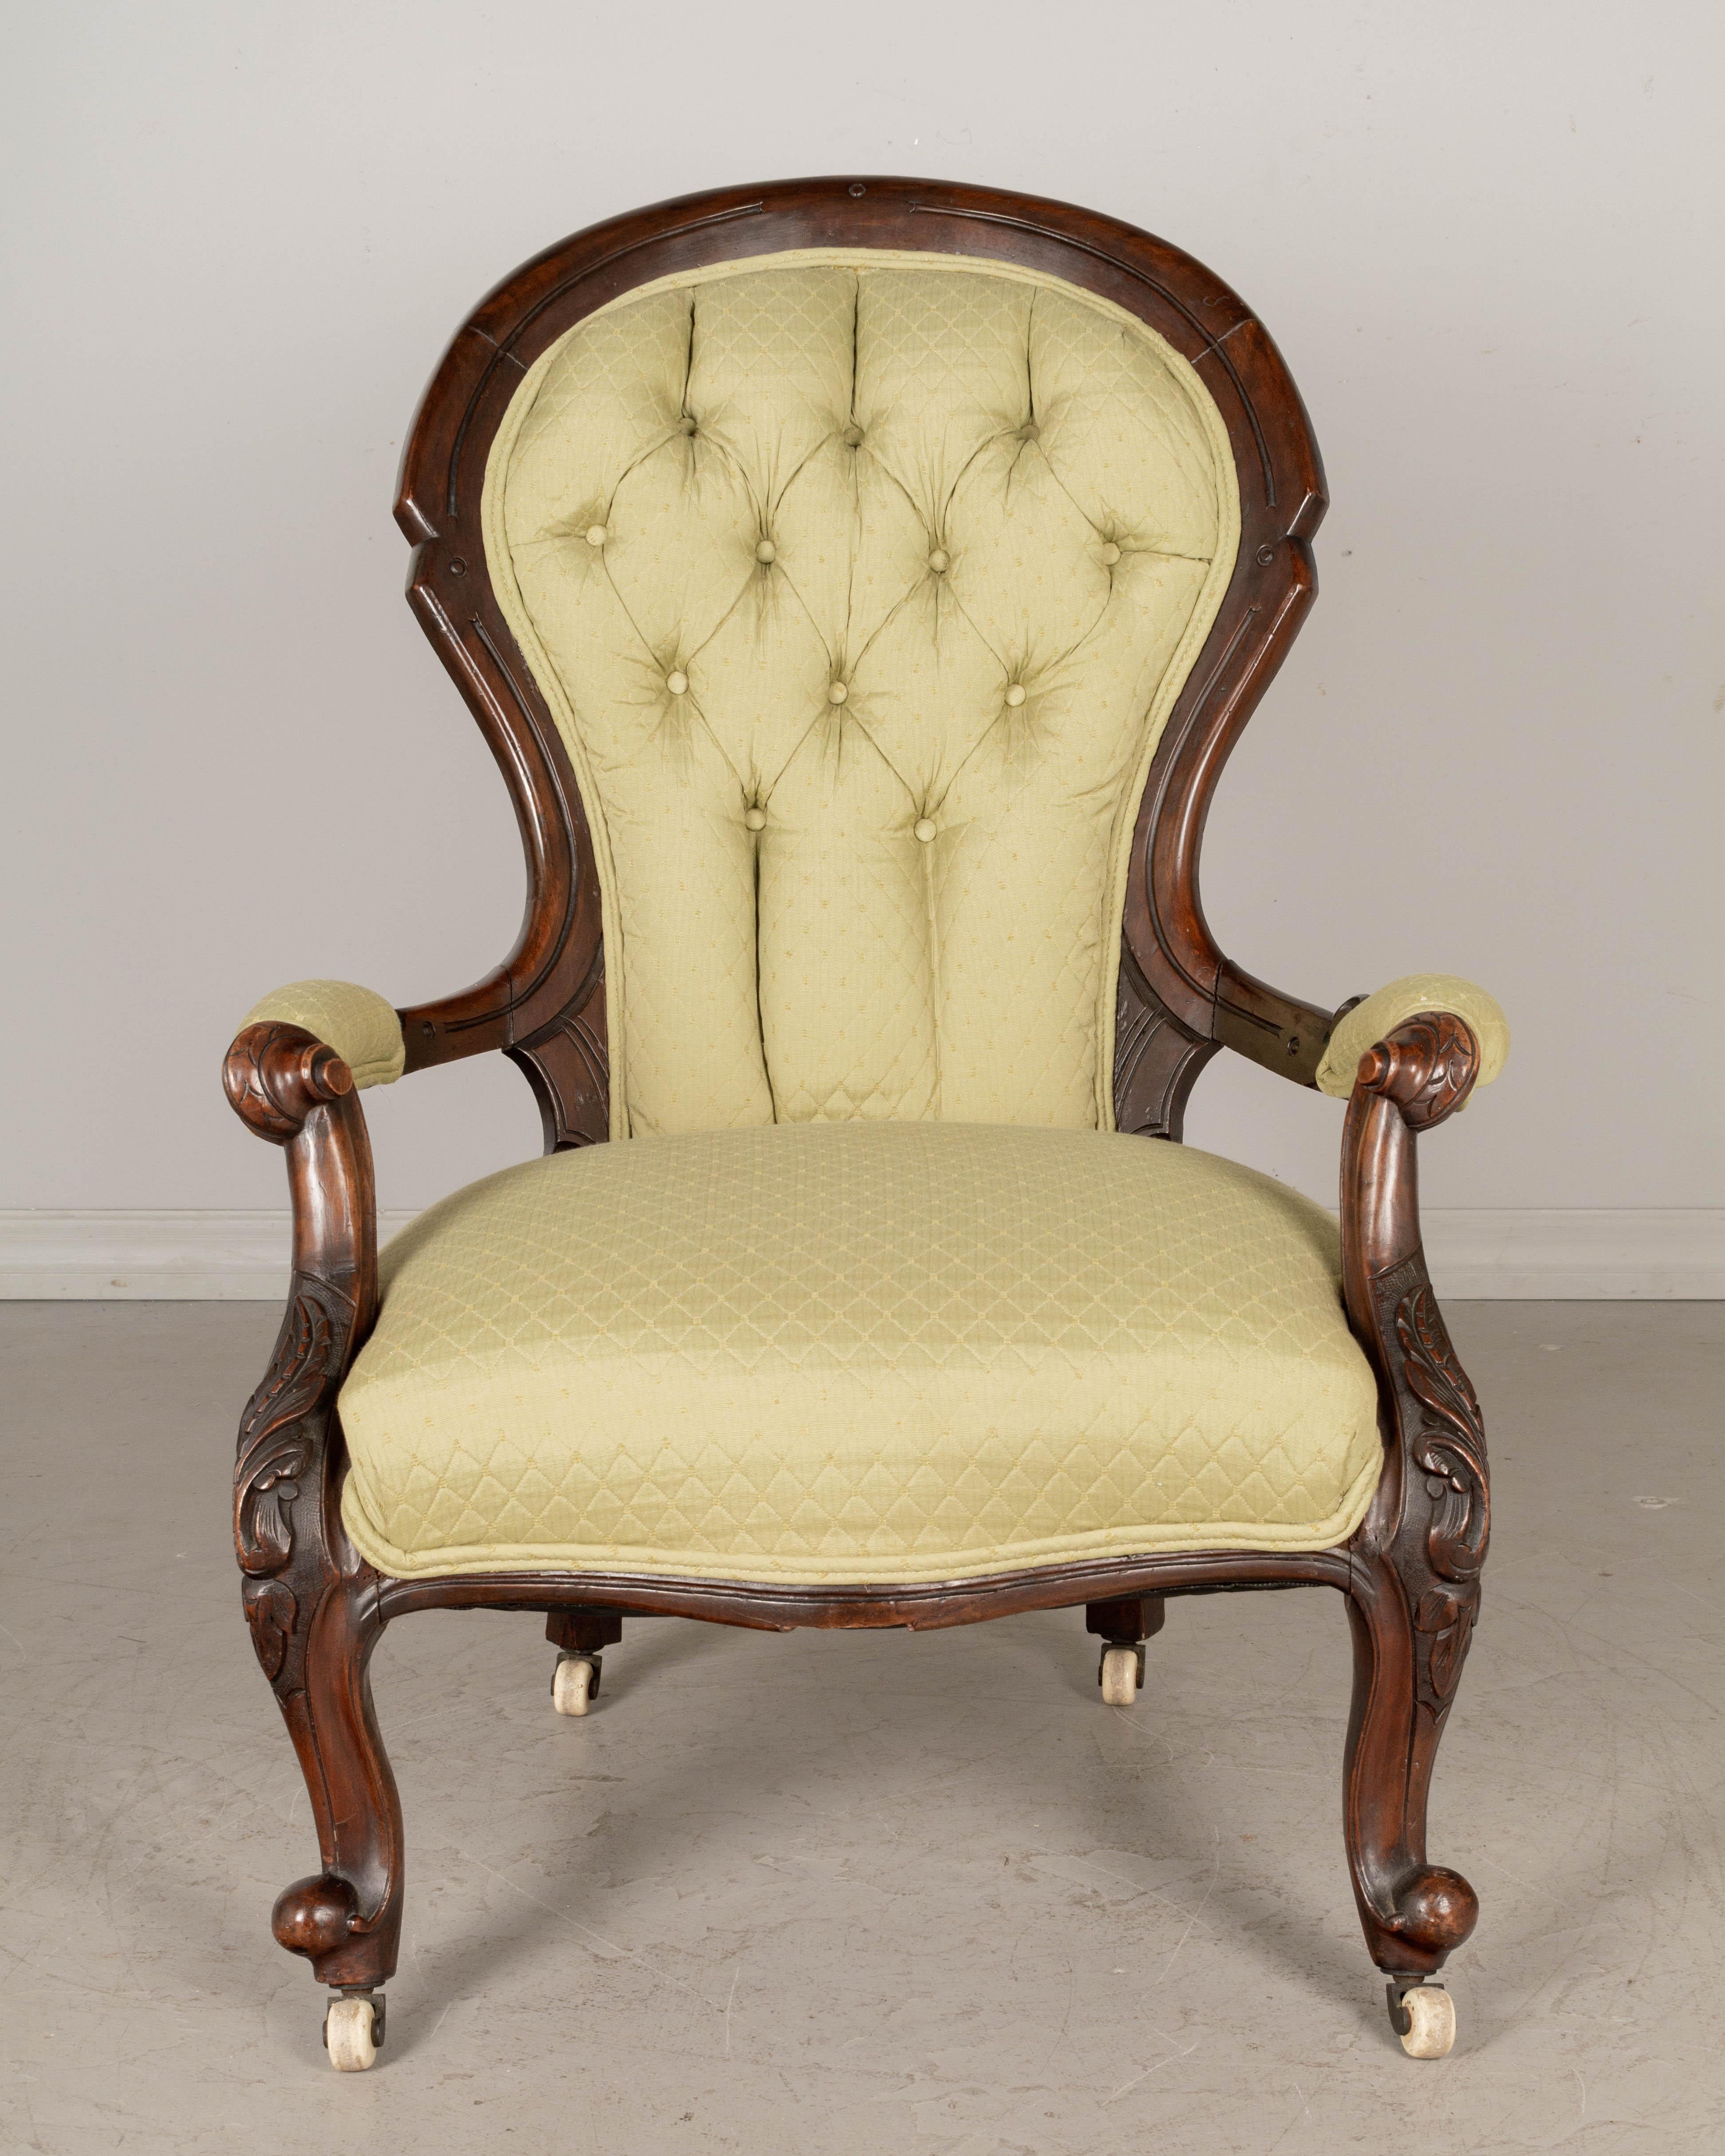 Upholstery 19th Century Victorian Chesterfield His and Hers Chairs For Sale